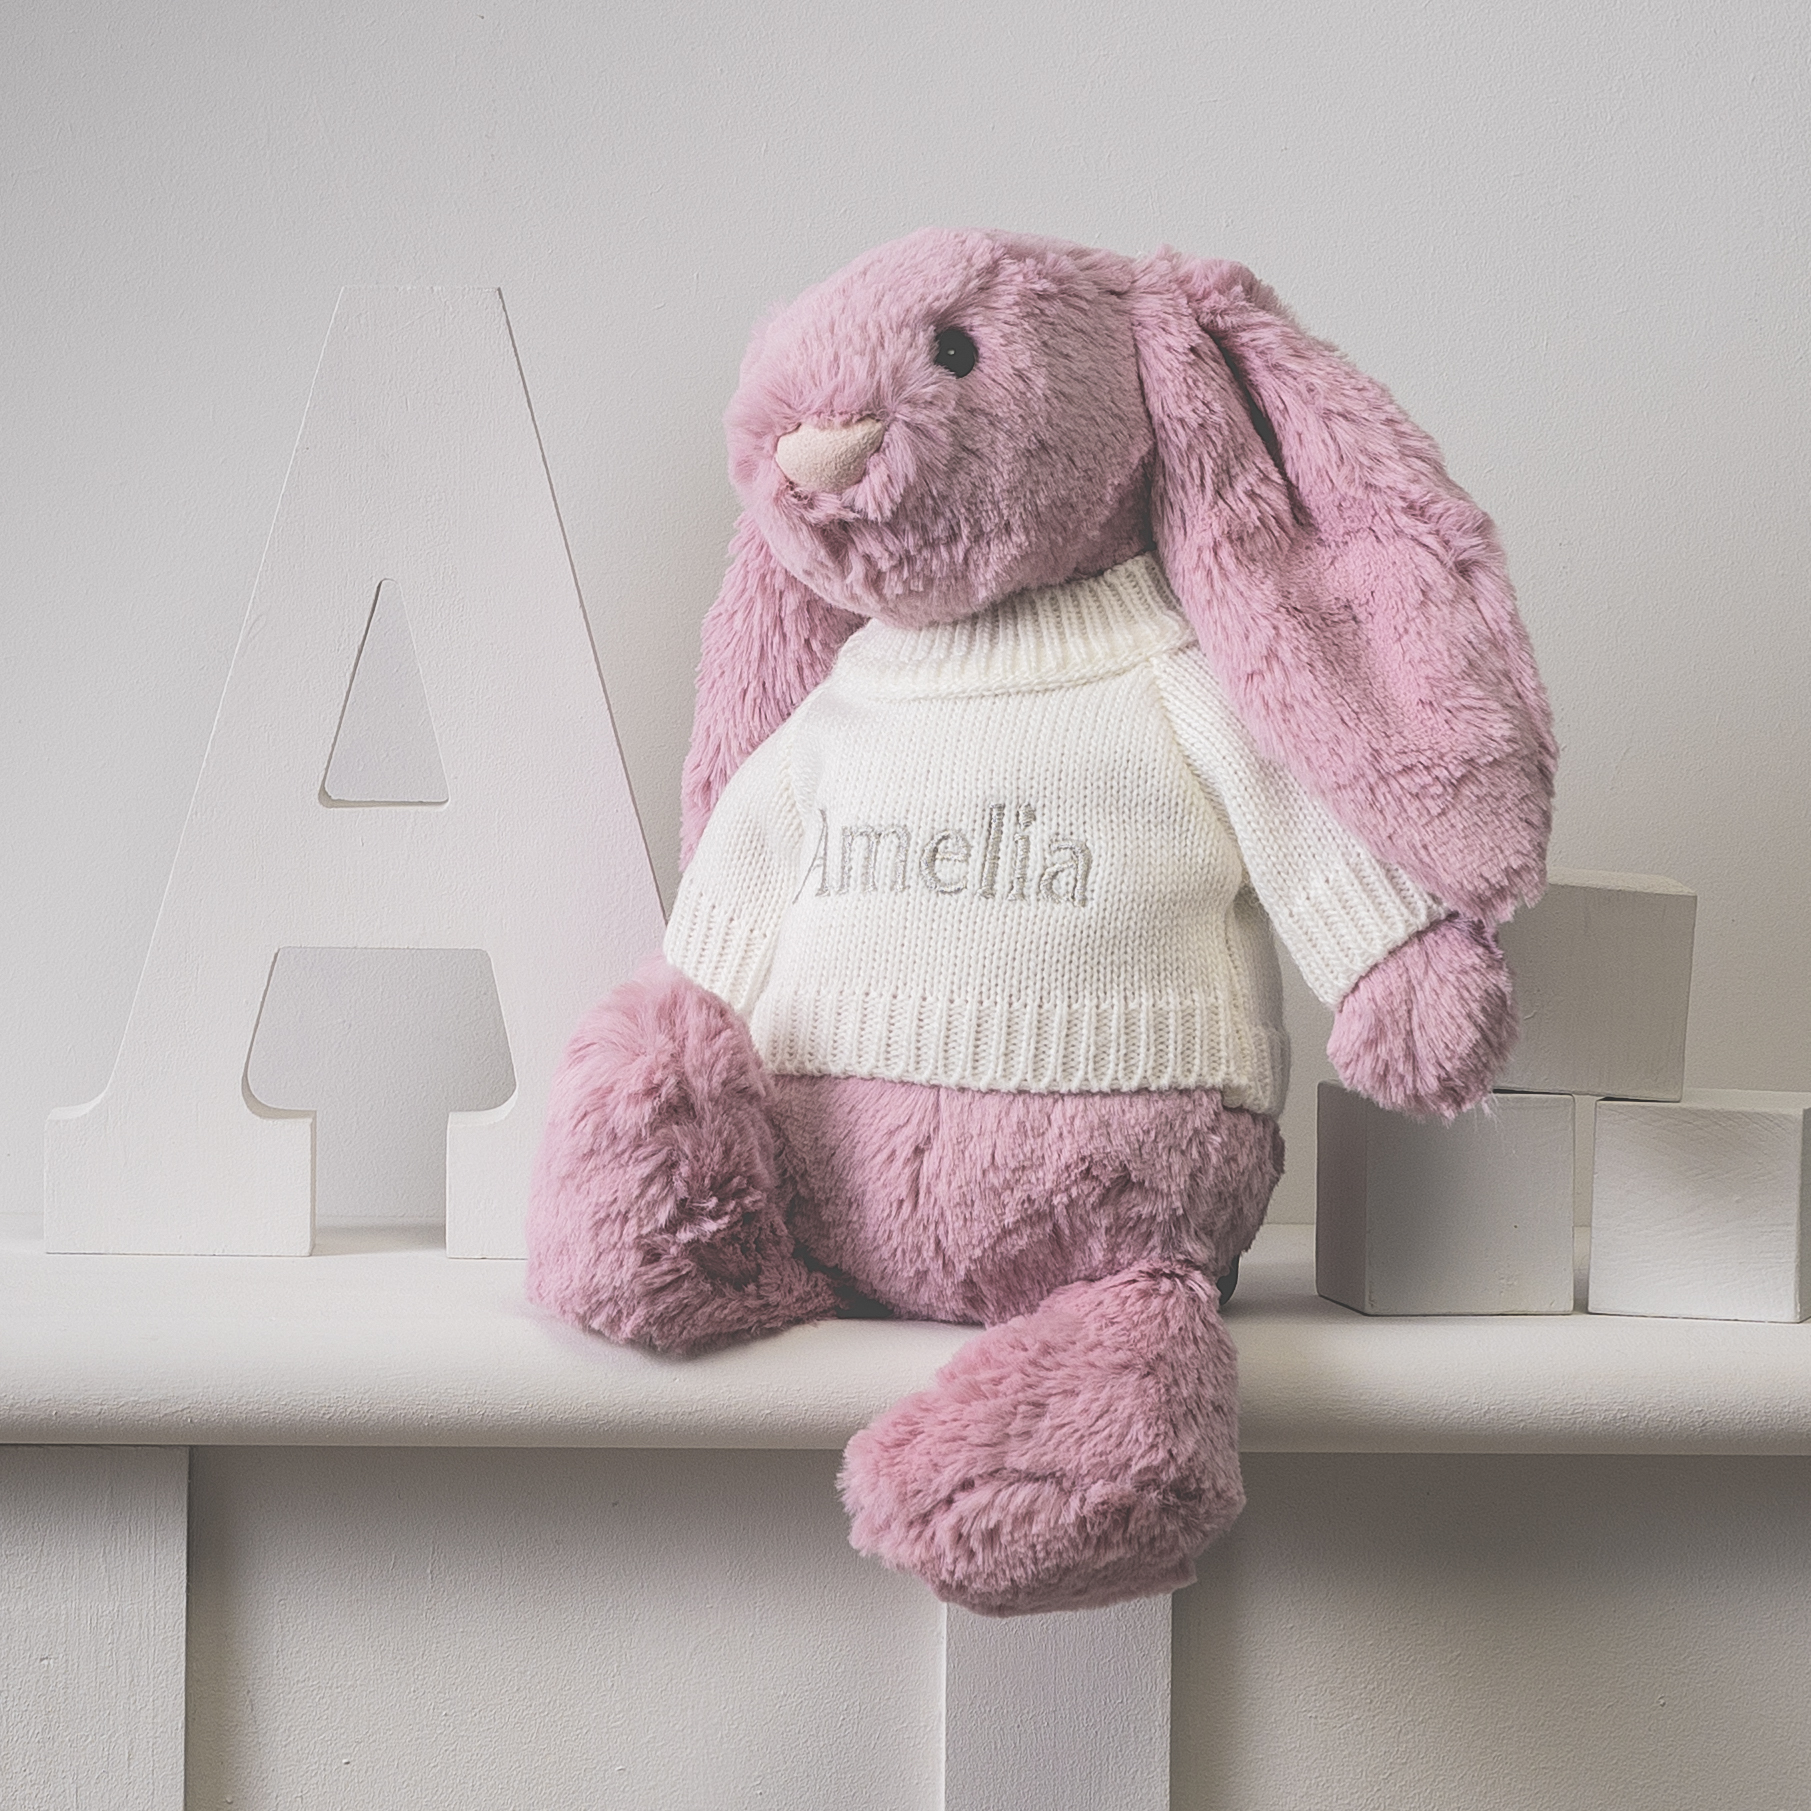 Jellycat large bashful bunny soft toy with 'Big Hugs' jumper